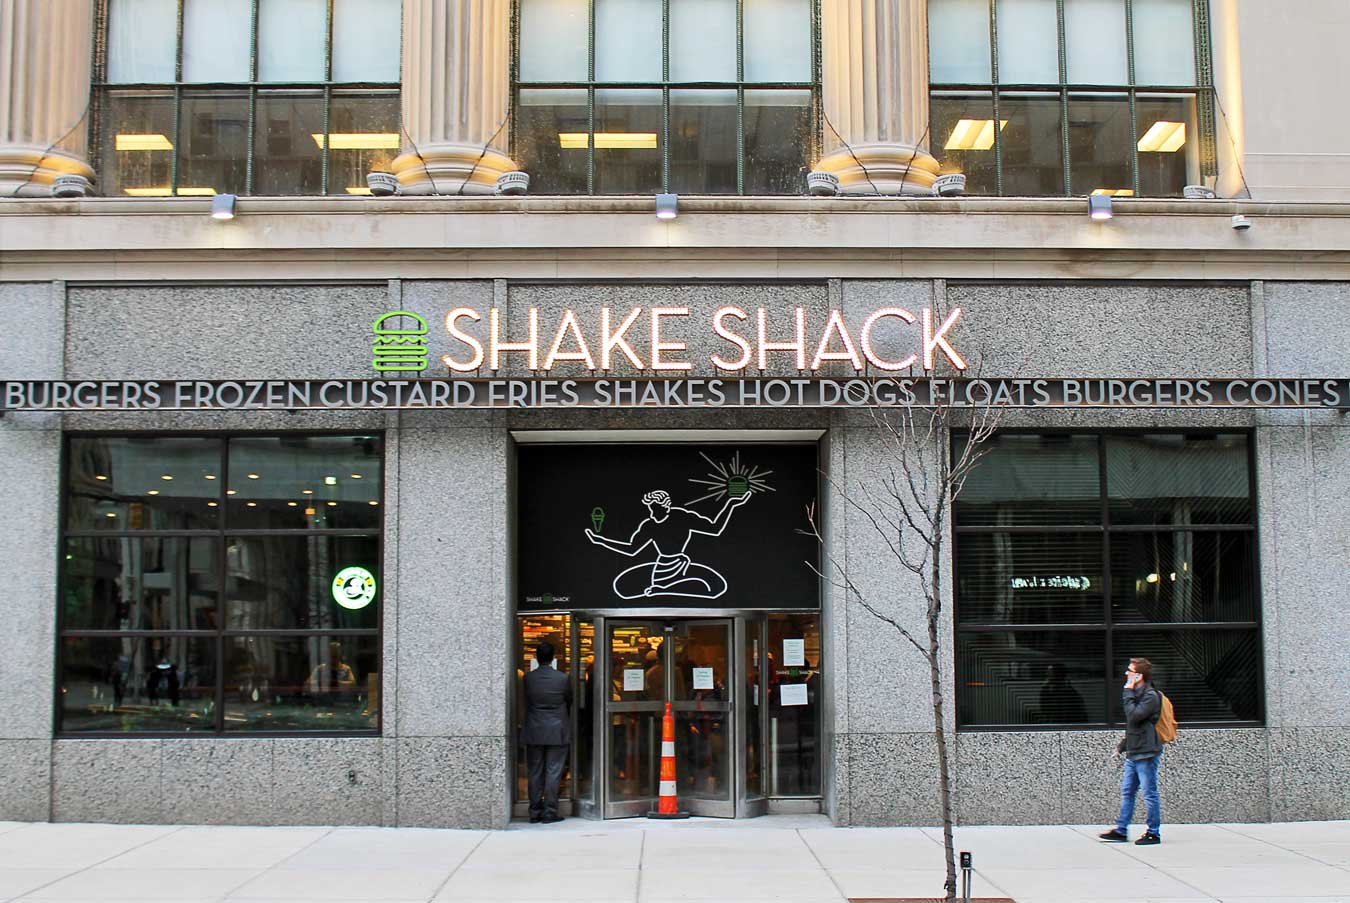 Shake Shack Detroit Might Be Your New Favorite Burger Spot /// - From sandwiches, fries, and shakes to local flavors and an awesome location, learn why long-time fans and newbies alike are sure to love the new Shake Shack in Downtown Detroit, Michigan. /// via Wading in Big Shoes